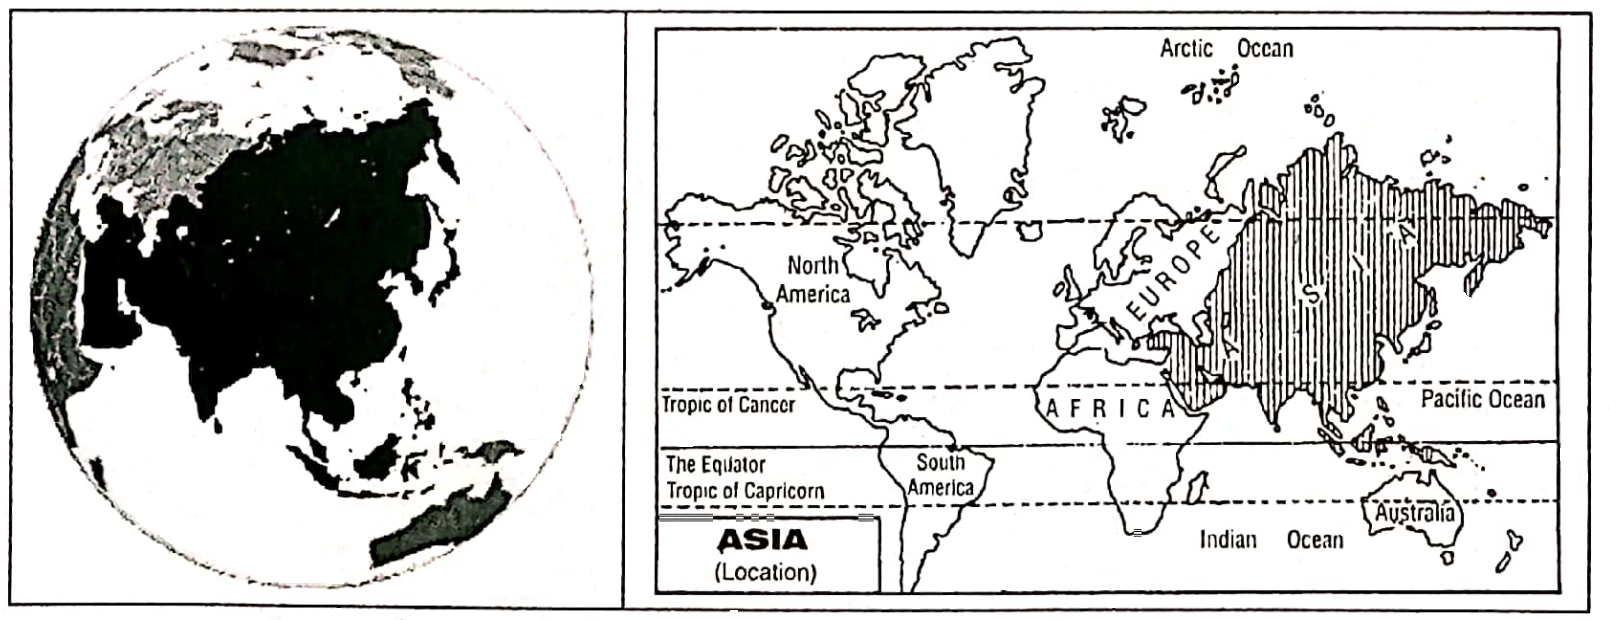 WBBSE Solution For Class 7 Geography Chapter 9 Continent Of Asia Asia Location